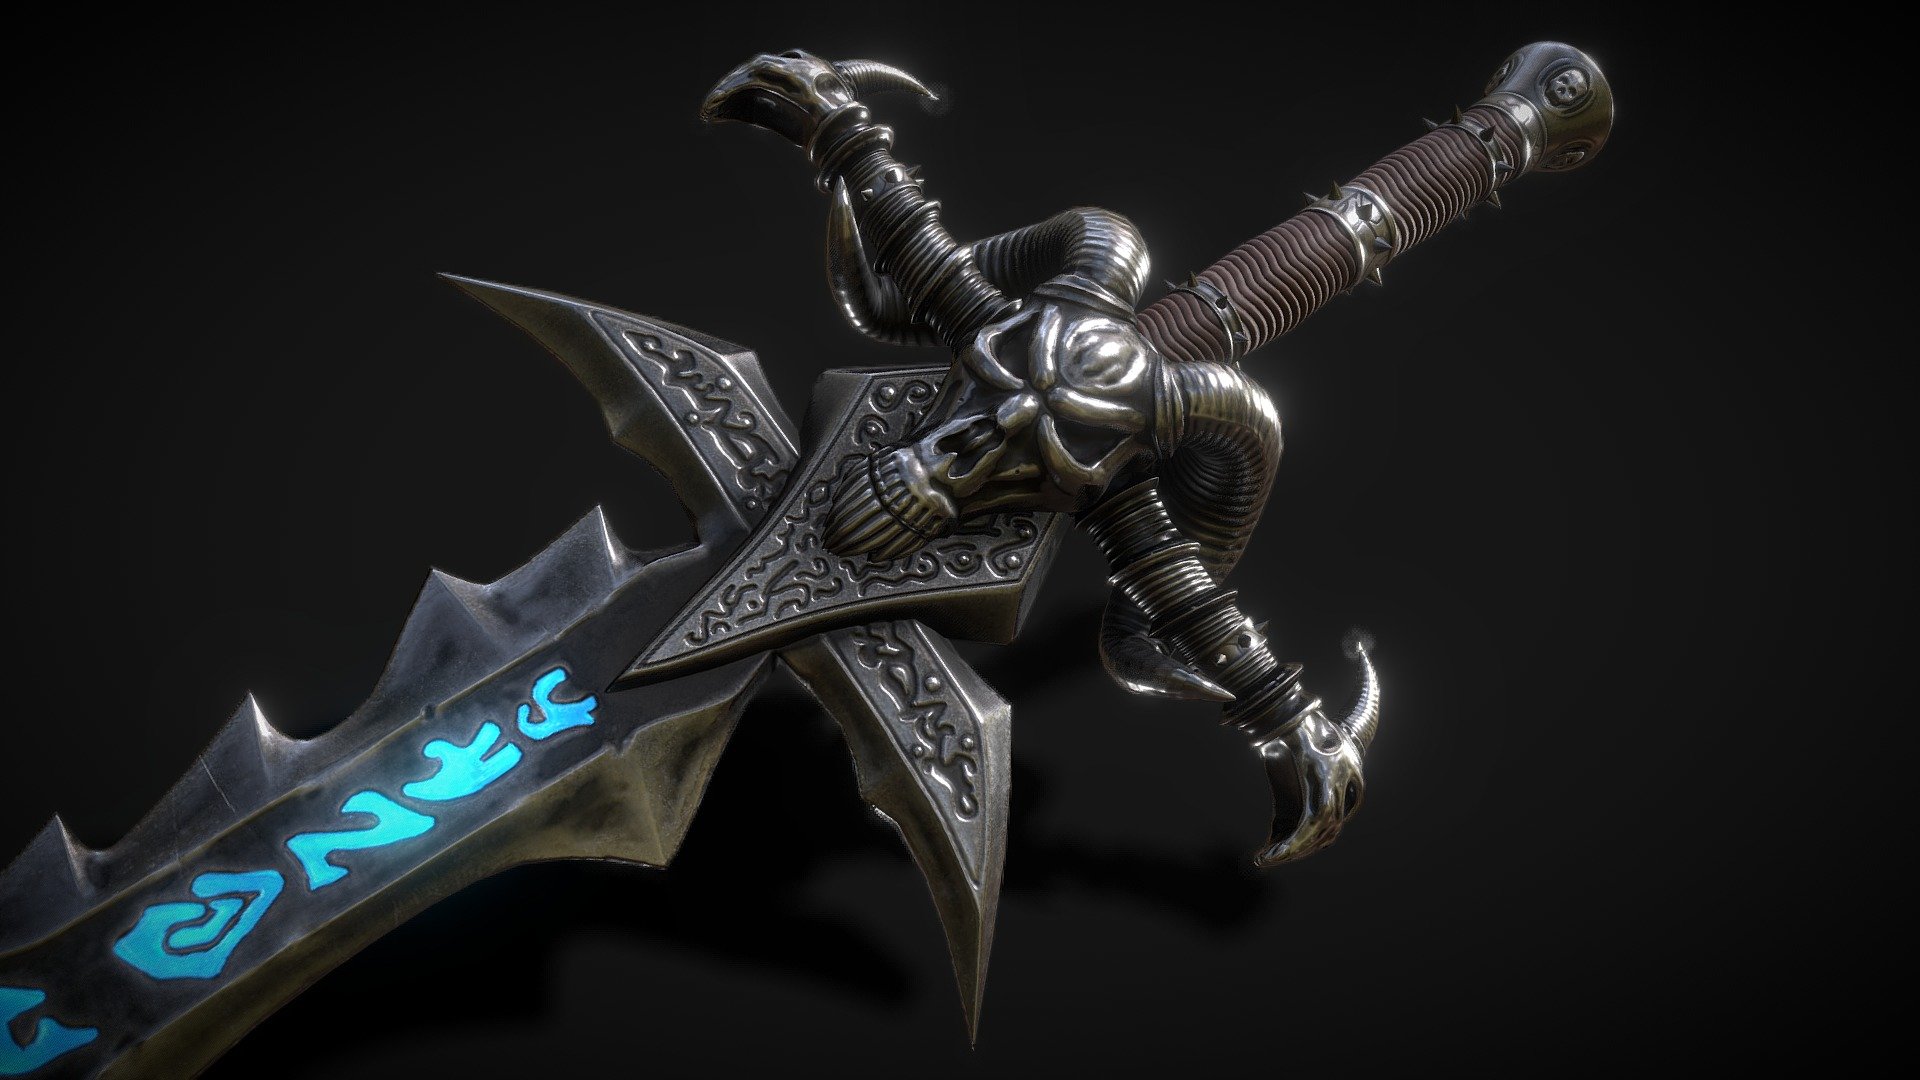 This is the 3d model of frostmourne sword, for use in animations, renders, games, printing&hellip; etc.

The rar files contains various file formats: 




.blend




Specifications:





Vertices: 7251

Polygons: 13818

Materials: 1

Textures: 6



Model including all PBR textures set.(512 - 4k)




Diffuse/Albedo

Metallic

Roughness

Normal(OpenGL, Direct x) 

Height 

Ambient Occlusion

The .blend file is the original version prepared to render.

Feel free to ask any question or request modifications.
Visit my profile to find more products.


Created in blender, Substance painter - Frostmourne - Buy Royalty Free 3D model by (v•Ä•₼.P•†•R•È) (@nagi2427) 3d model